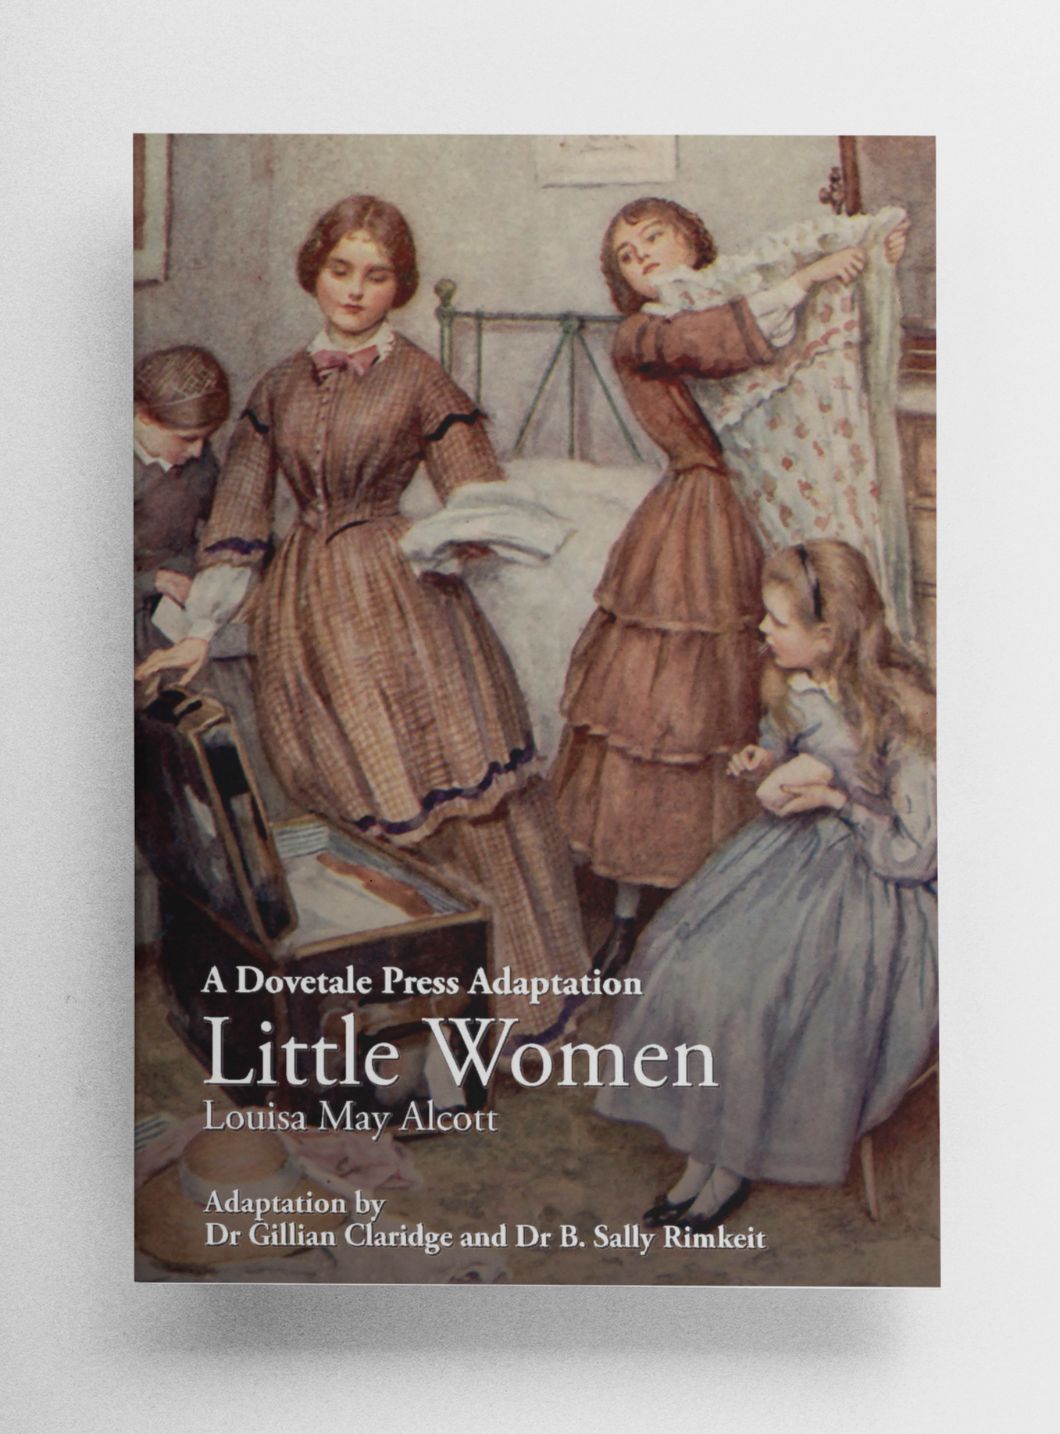 Book cover of Dovetale Press Adaptation of Little Women by Louisa May Alcott. Adapted by Dr Gillian Claridge and Dr B. Sally Rimkeit